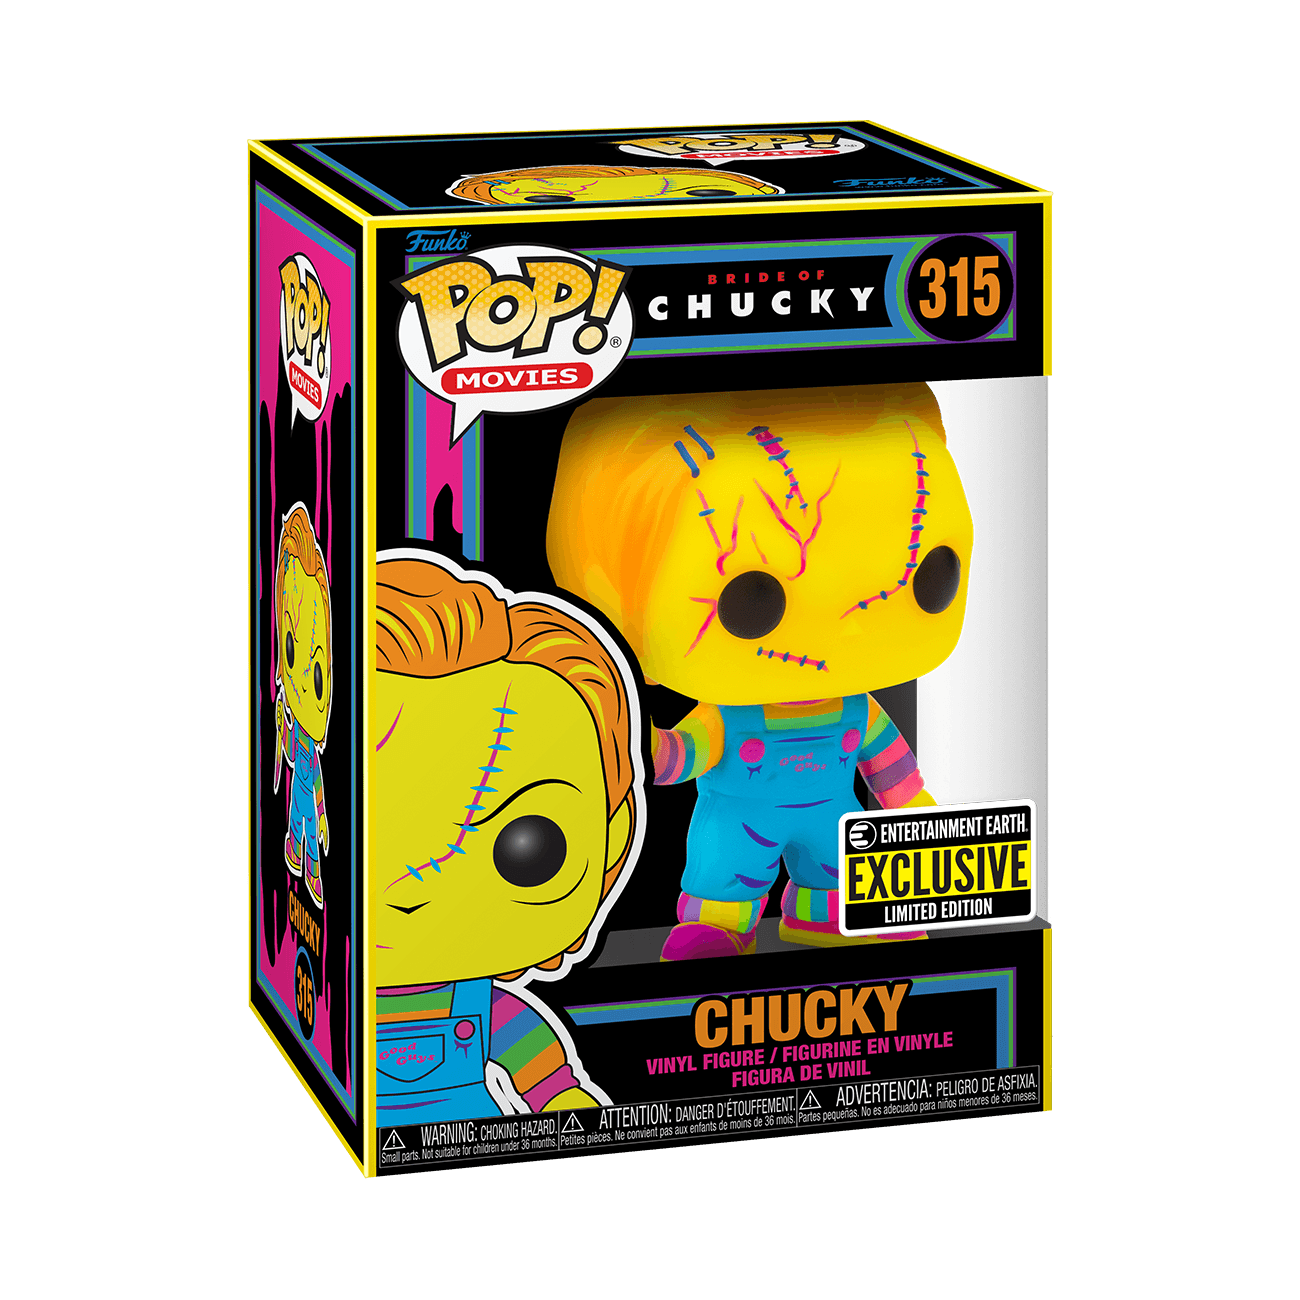 Funko Pop Bride of Chucky Black Light Entertainment Earth Exclusive Edition 315 - BumbleToys - 18+, Action Figures, Boys, Characters, Funko, Pre-Order